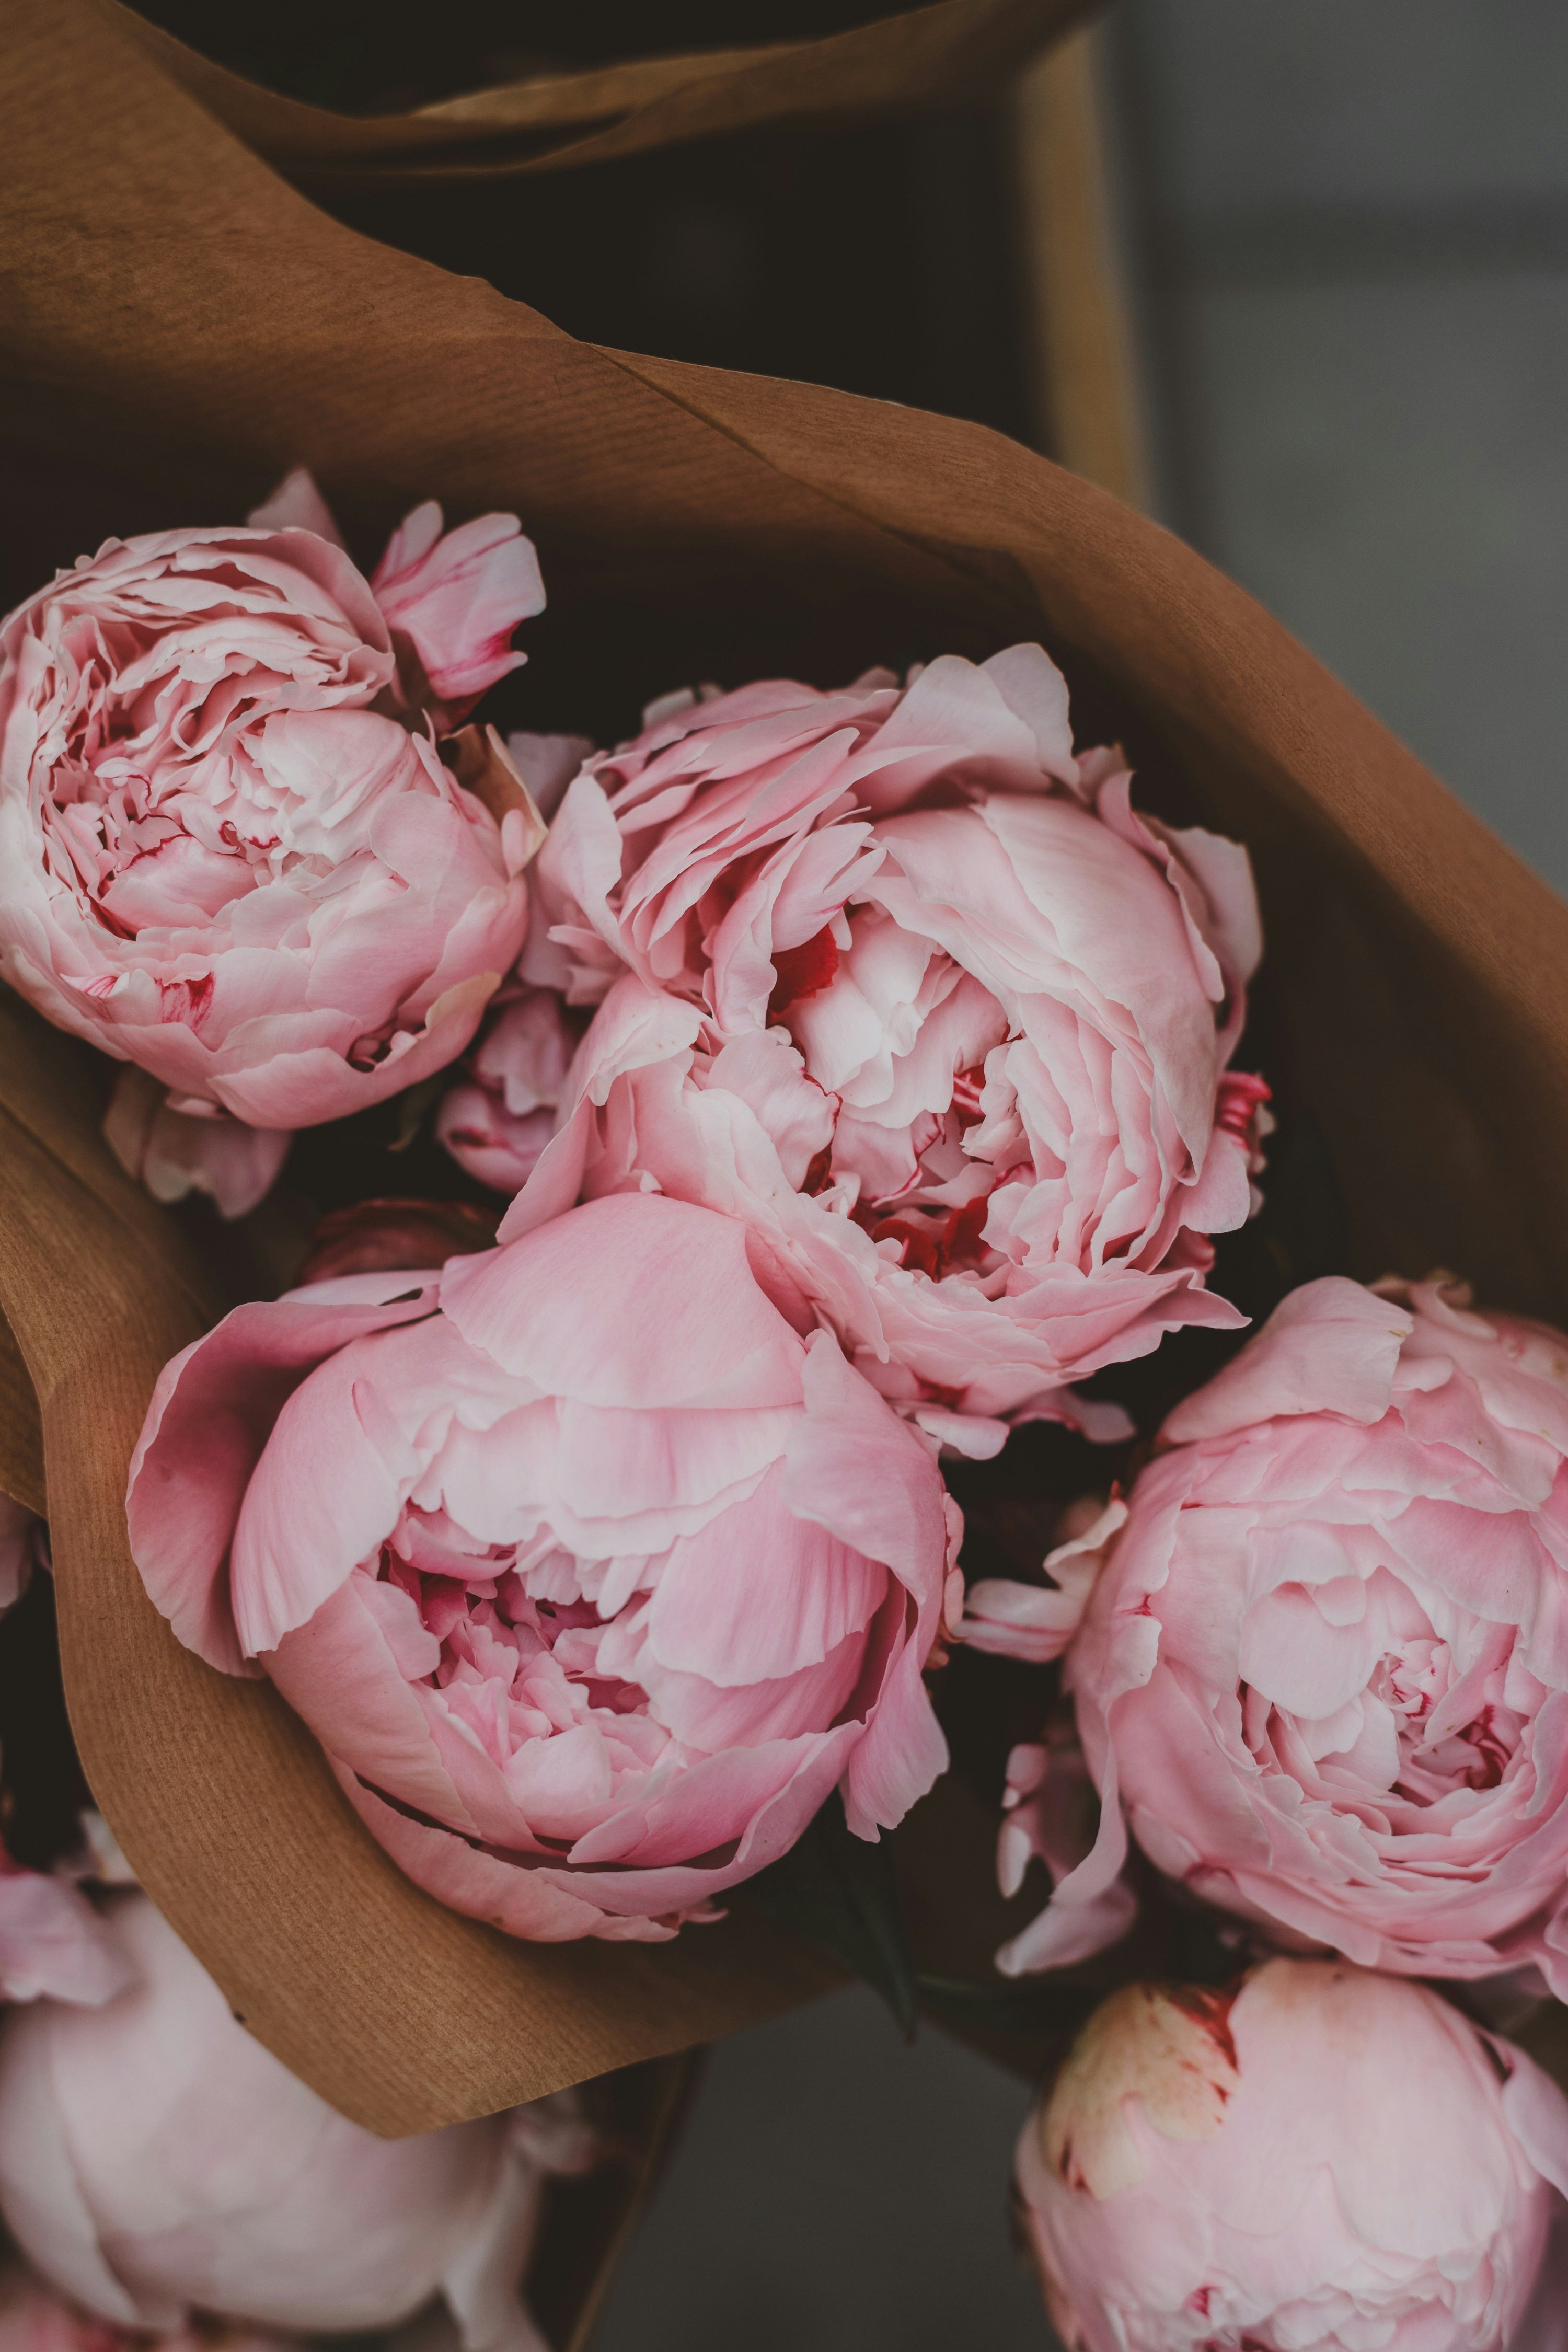 Grow Gorgeous Peonies: Planting, Care, and Why We Love Them